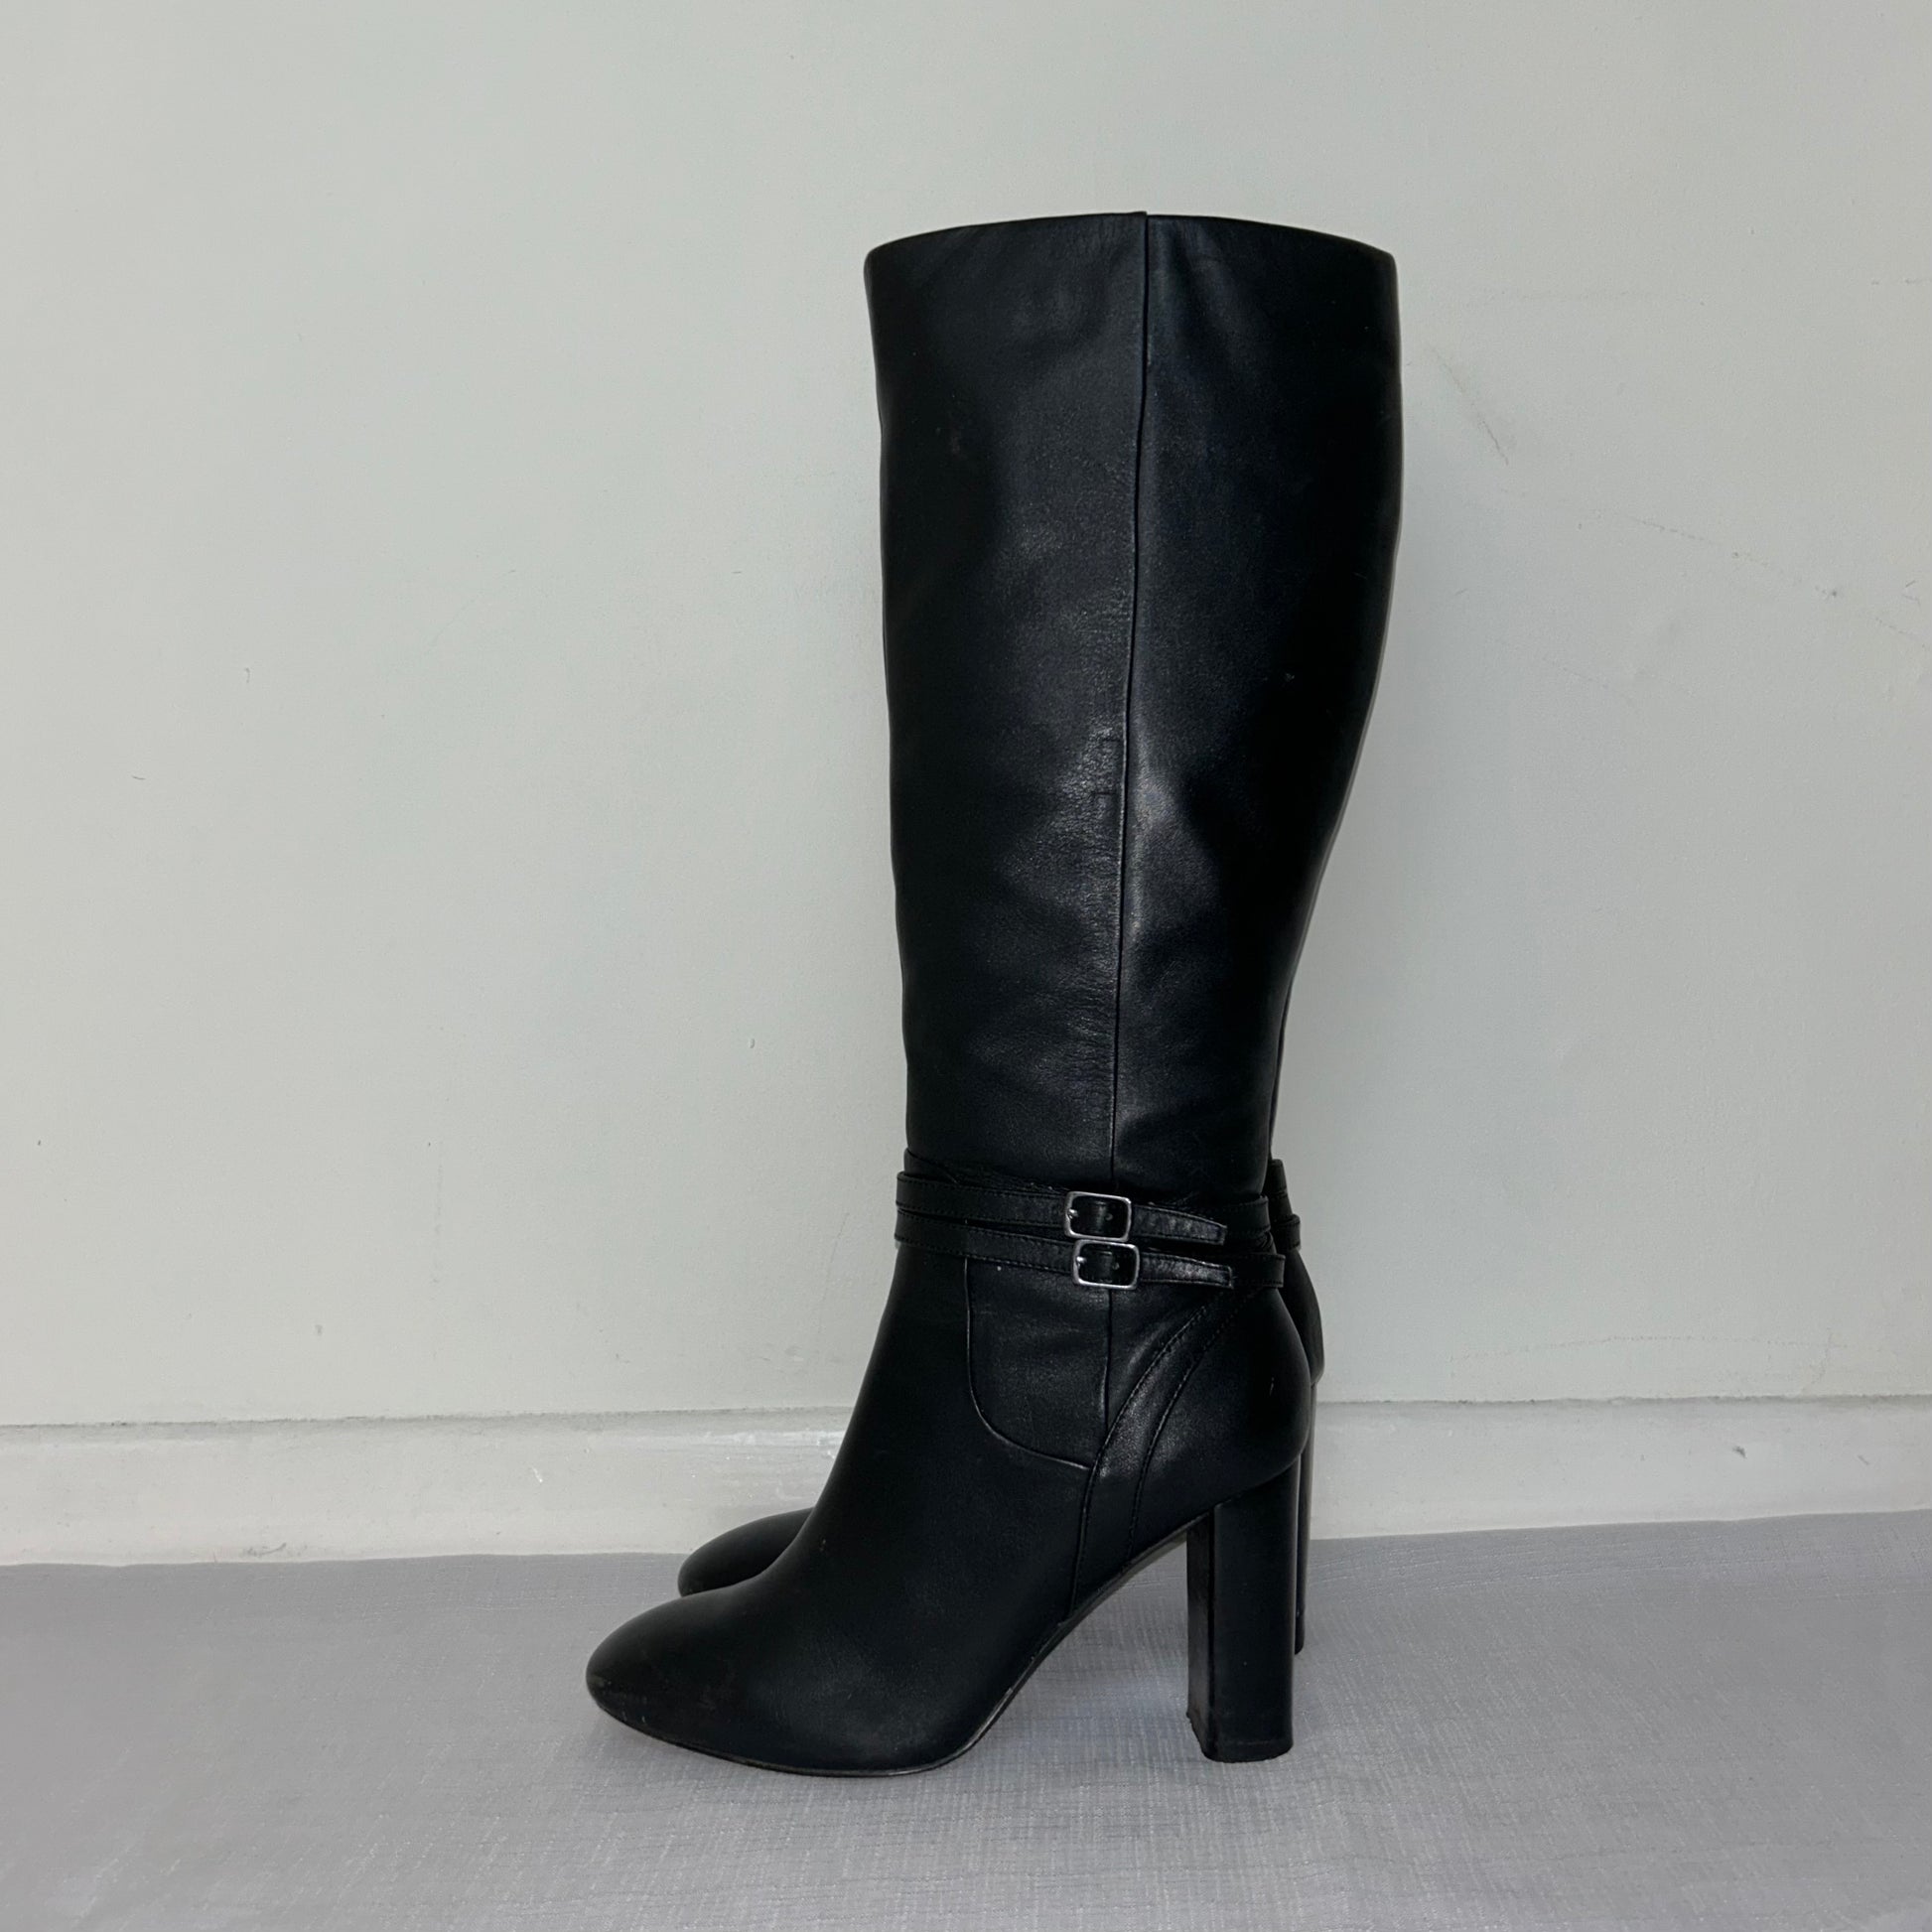 black knee high buckle boots shown on a white background